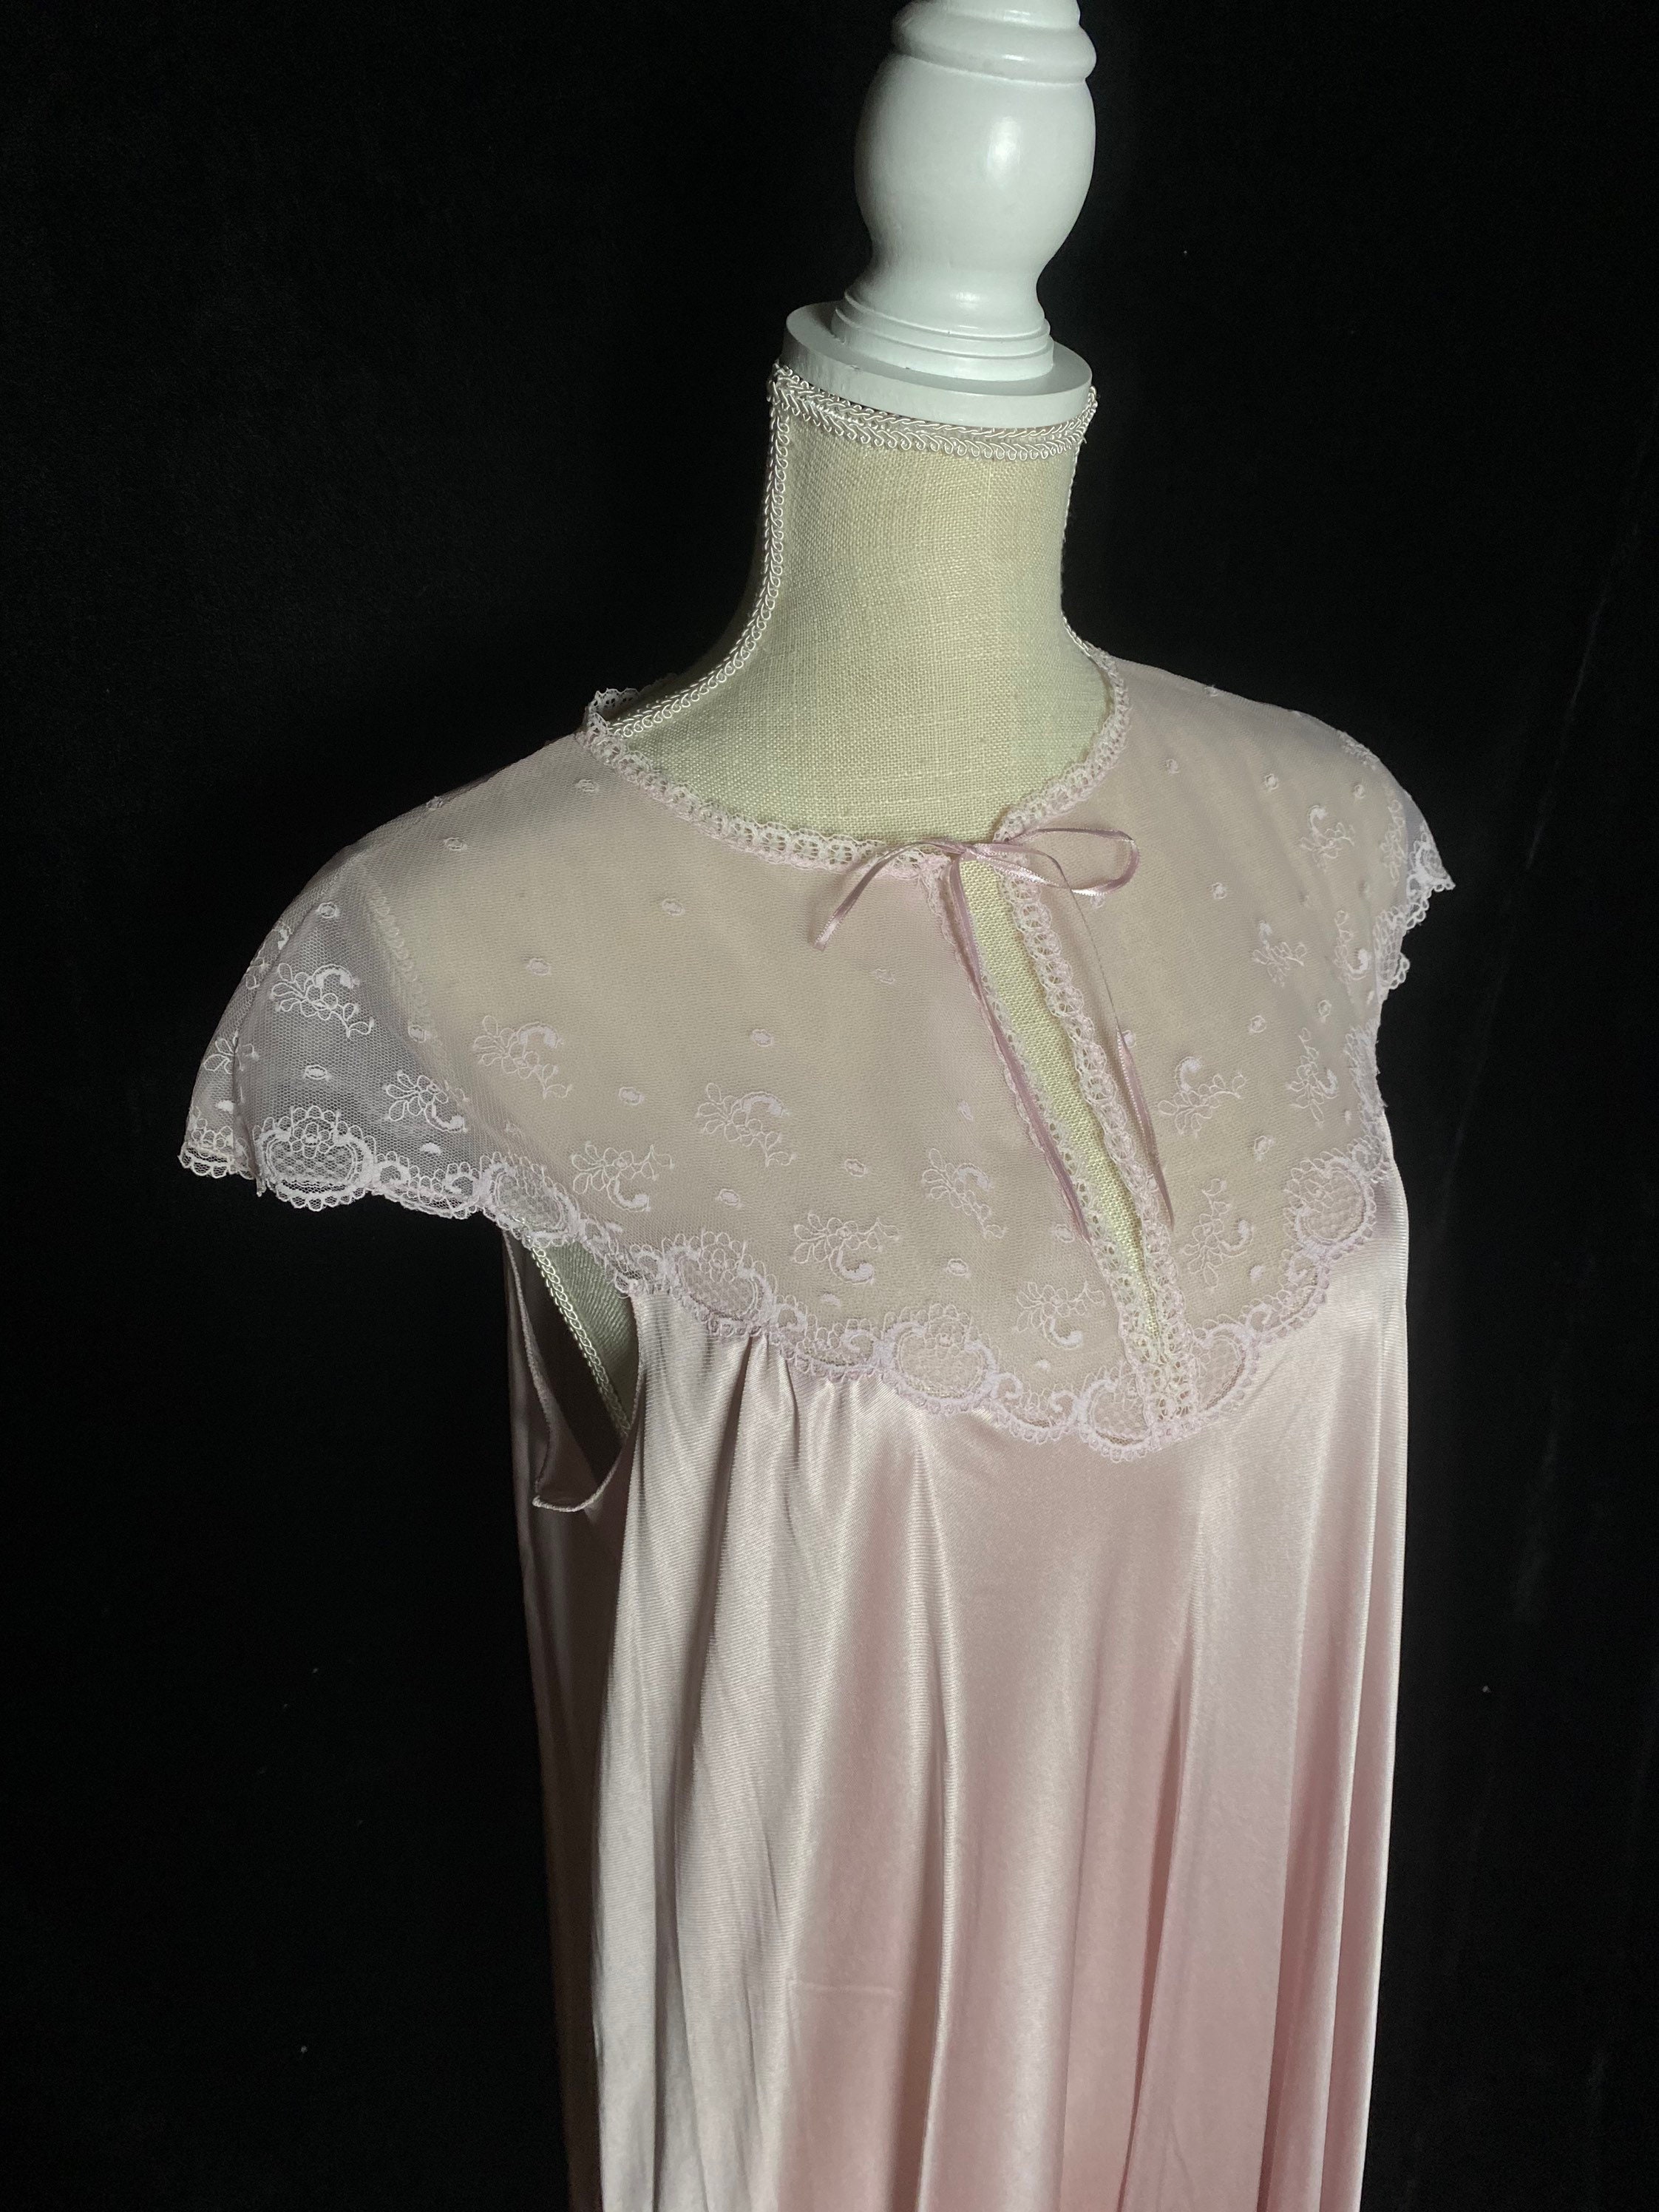 Vintage 1960s mauve pink nylon nightie night gown with lace | Etsy